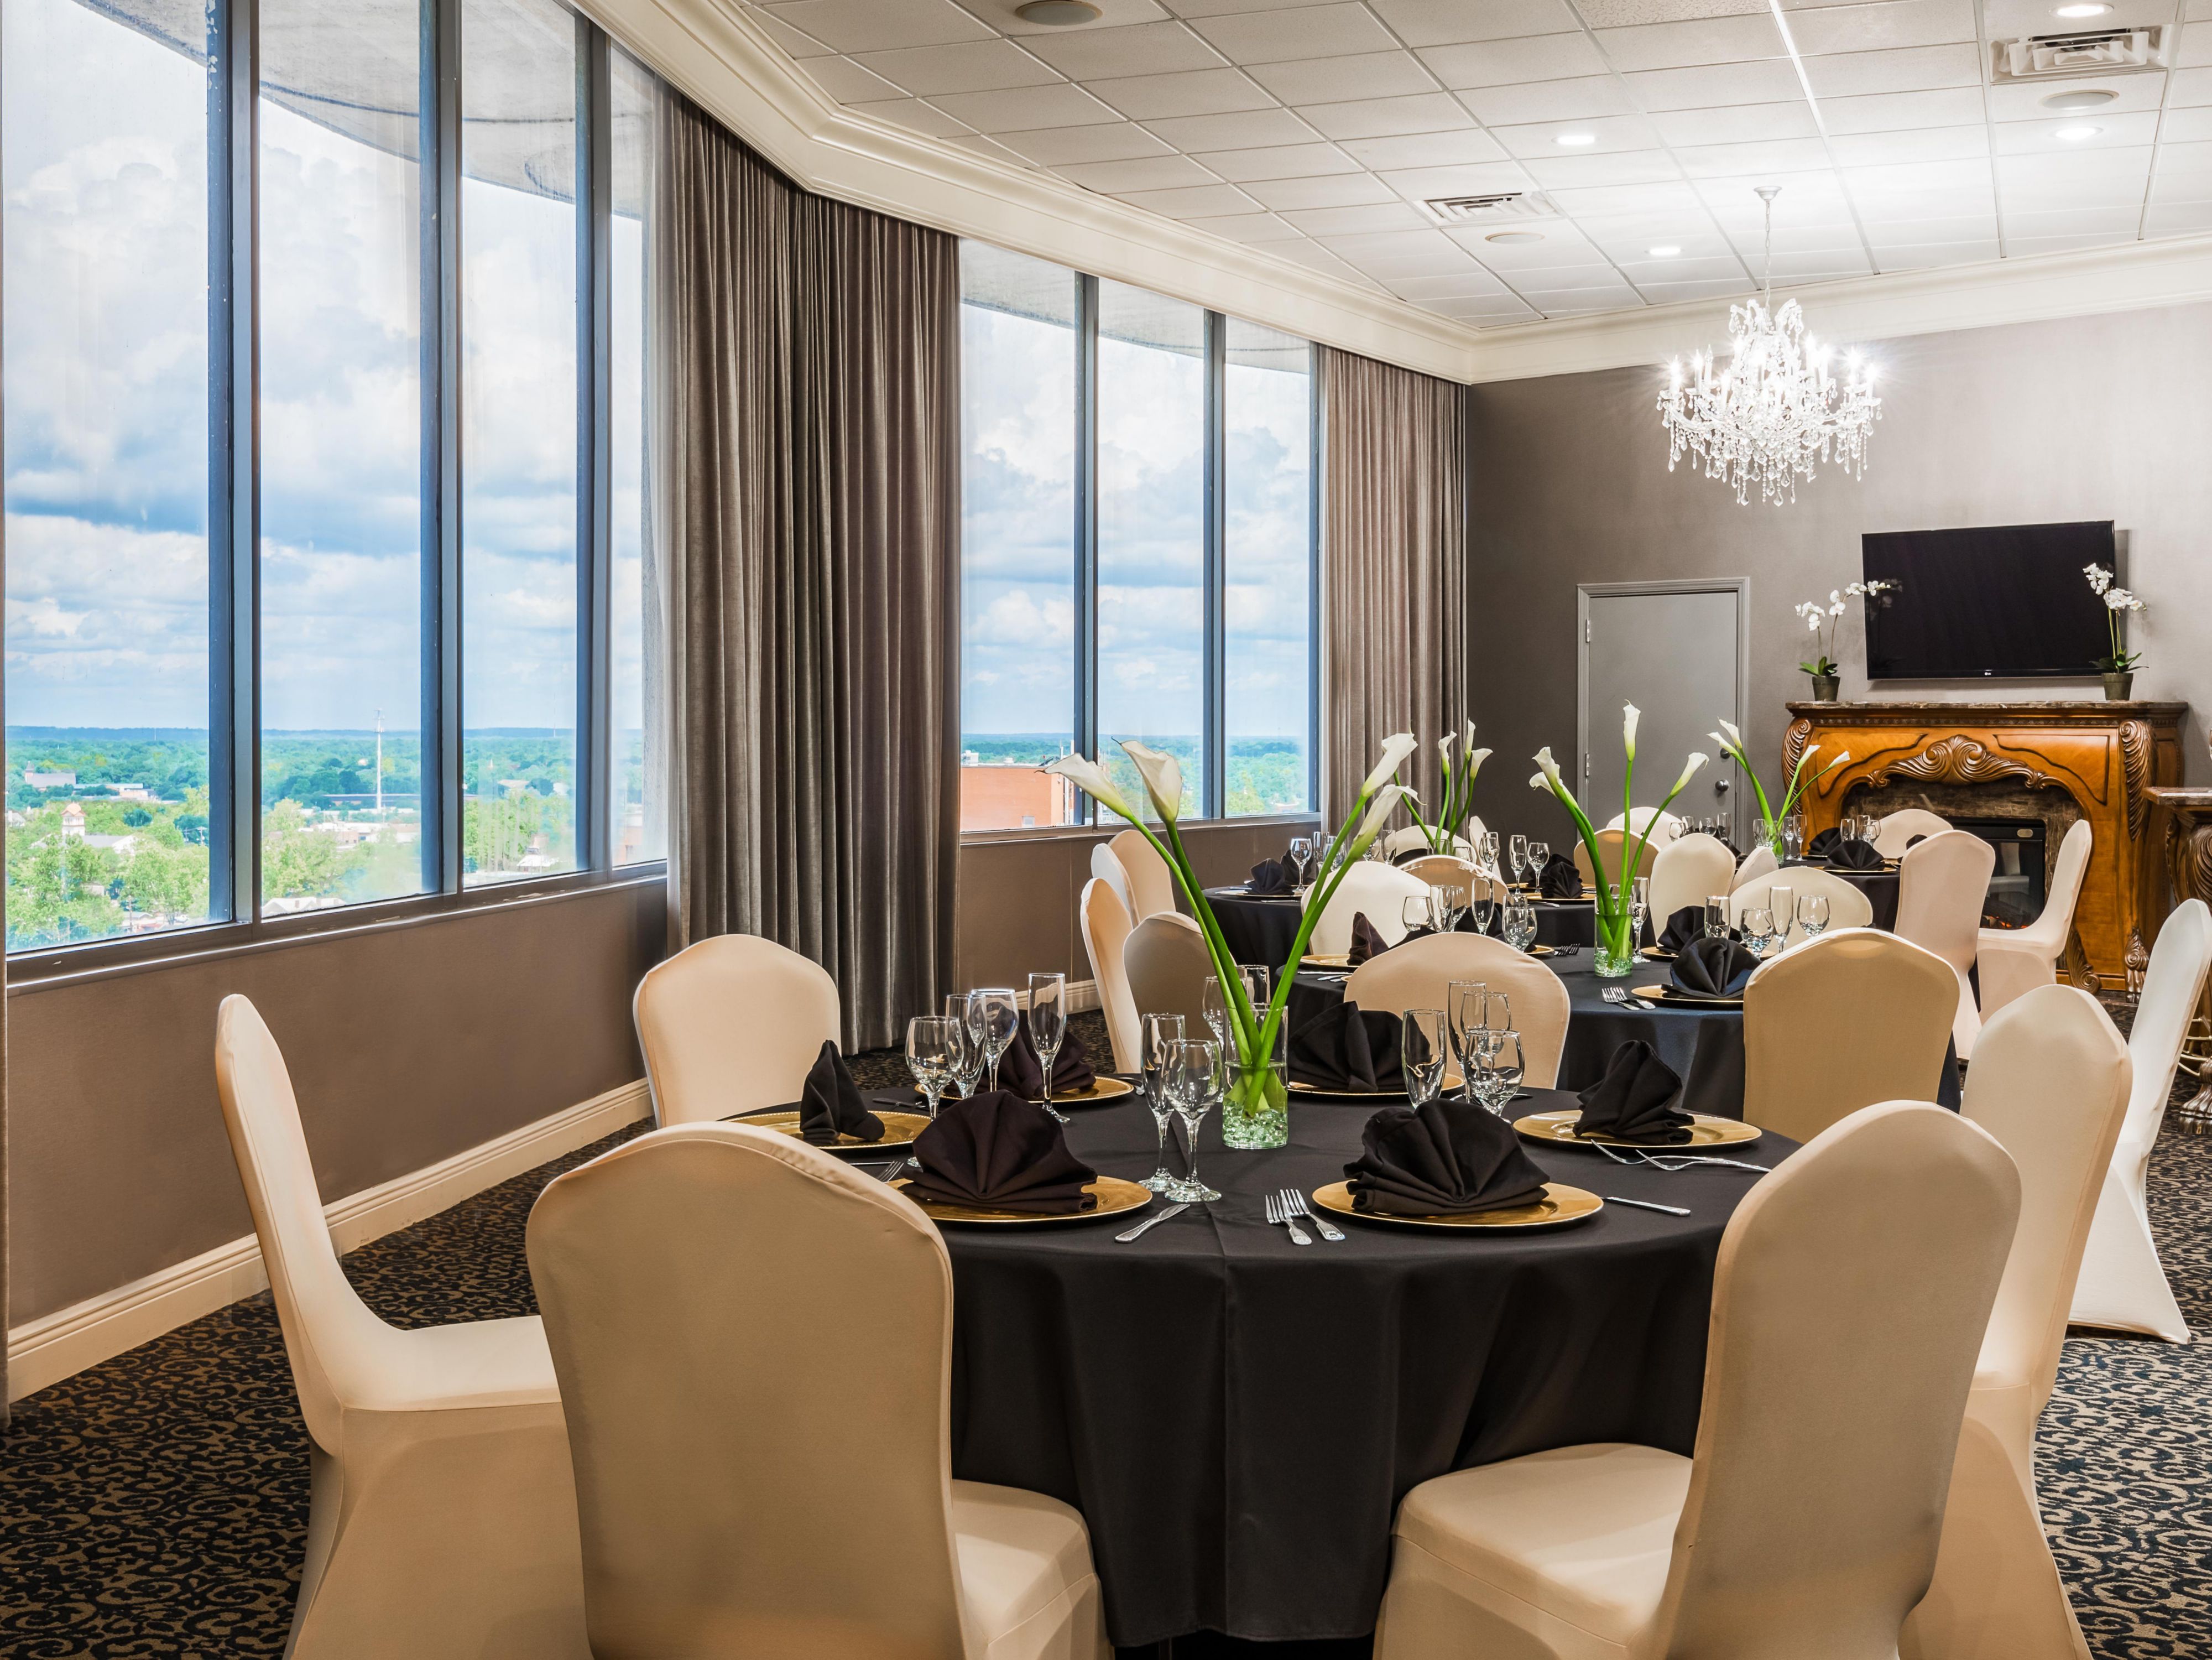 The Holiday Inn in downtown Mobile's historic district is the closest hotel to the civic center. Located one block away, we are the perfect hotel for your next group or convention block. We also have plenty of meeting space to host your event as well.